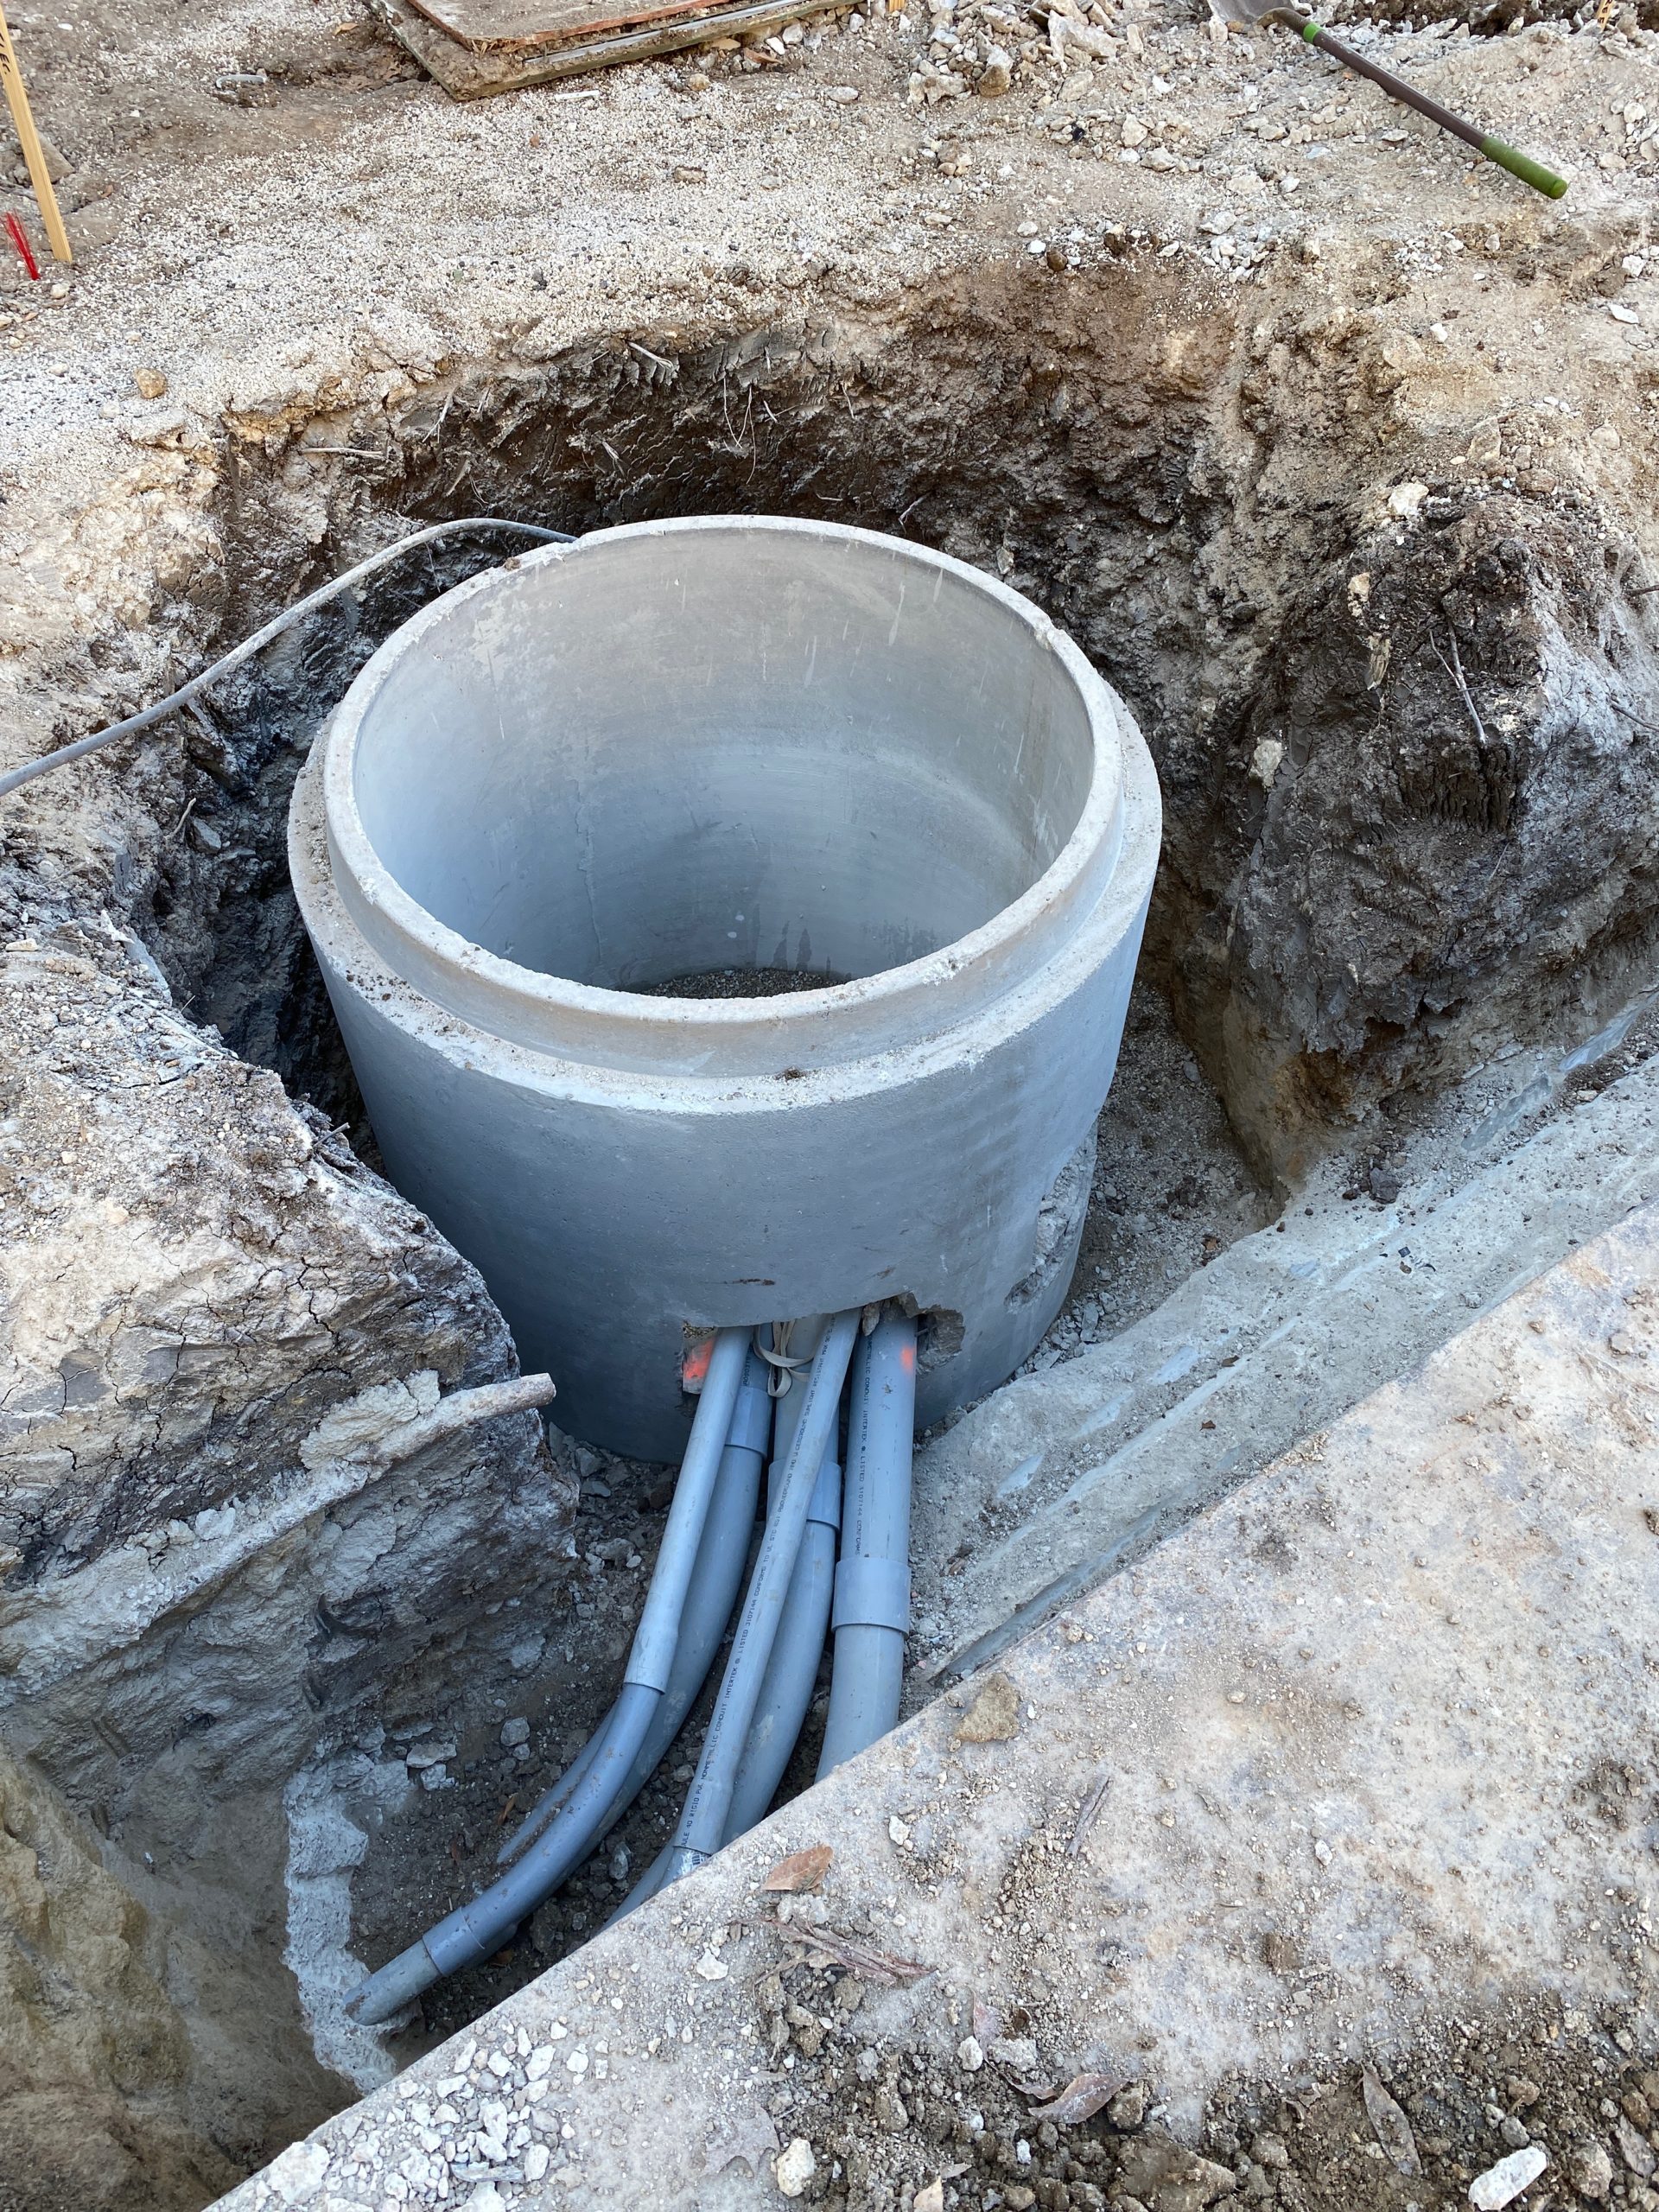 Round concrete tube with smaller pipes coming out.